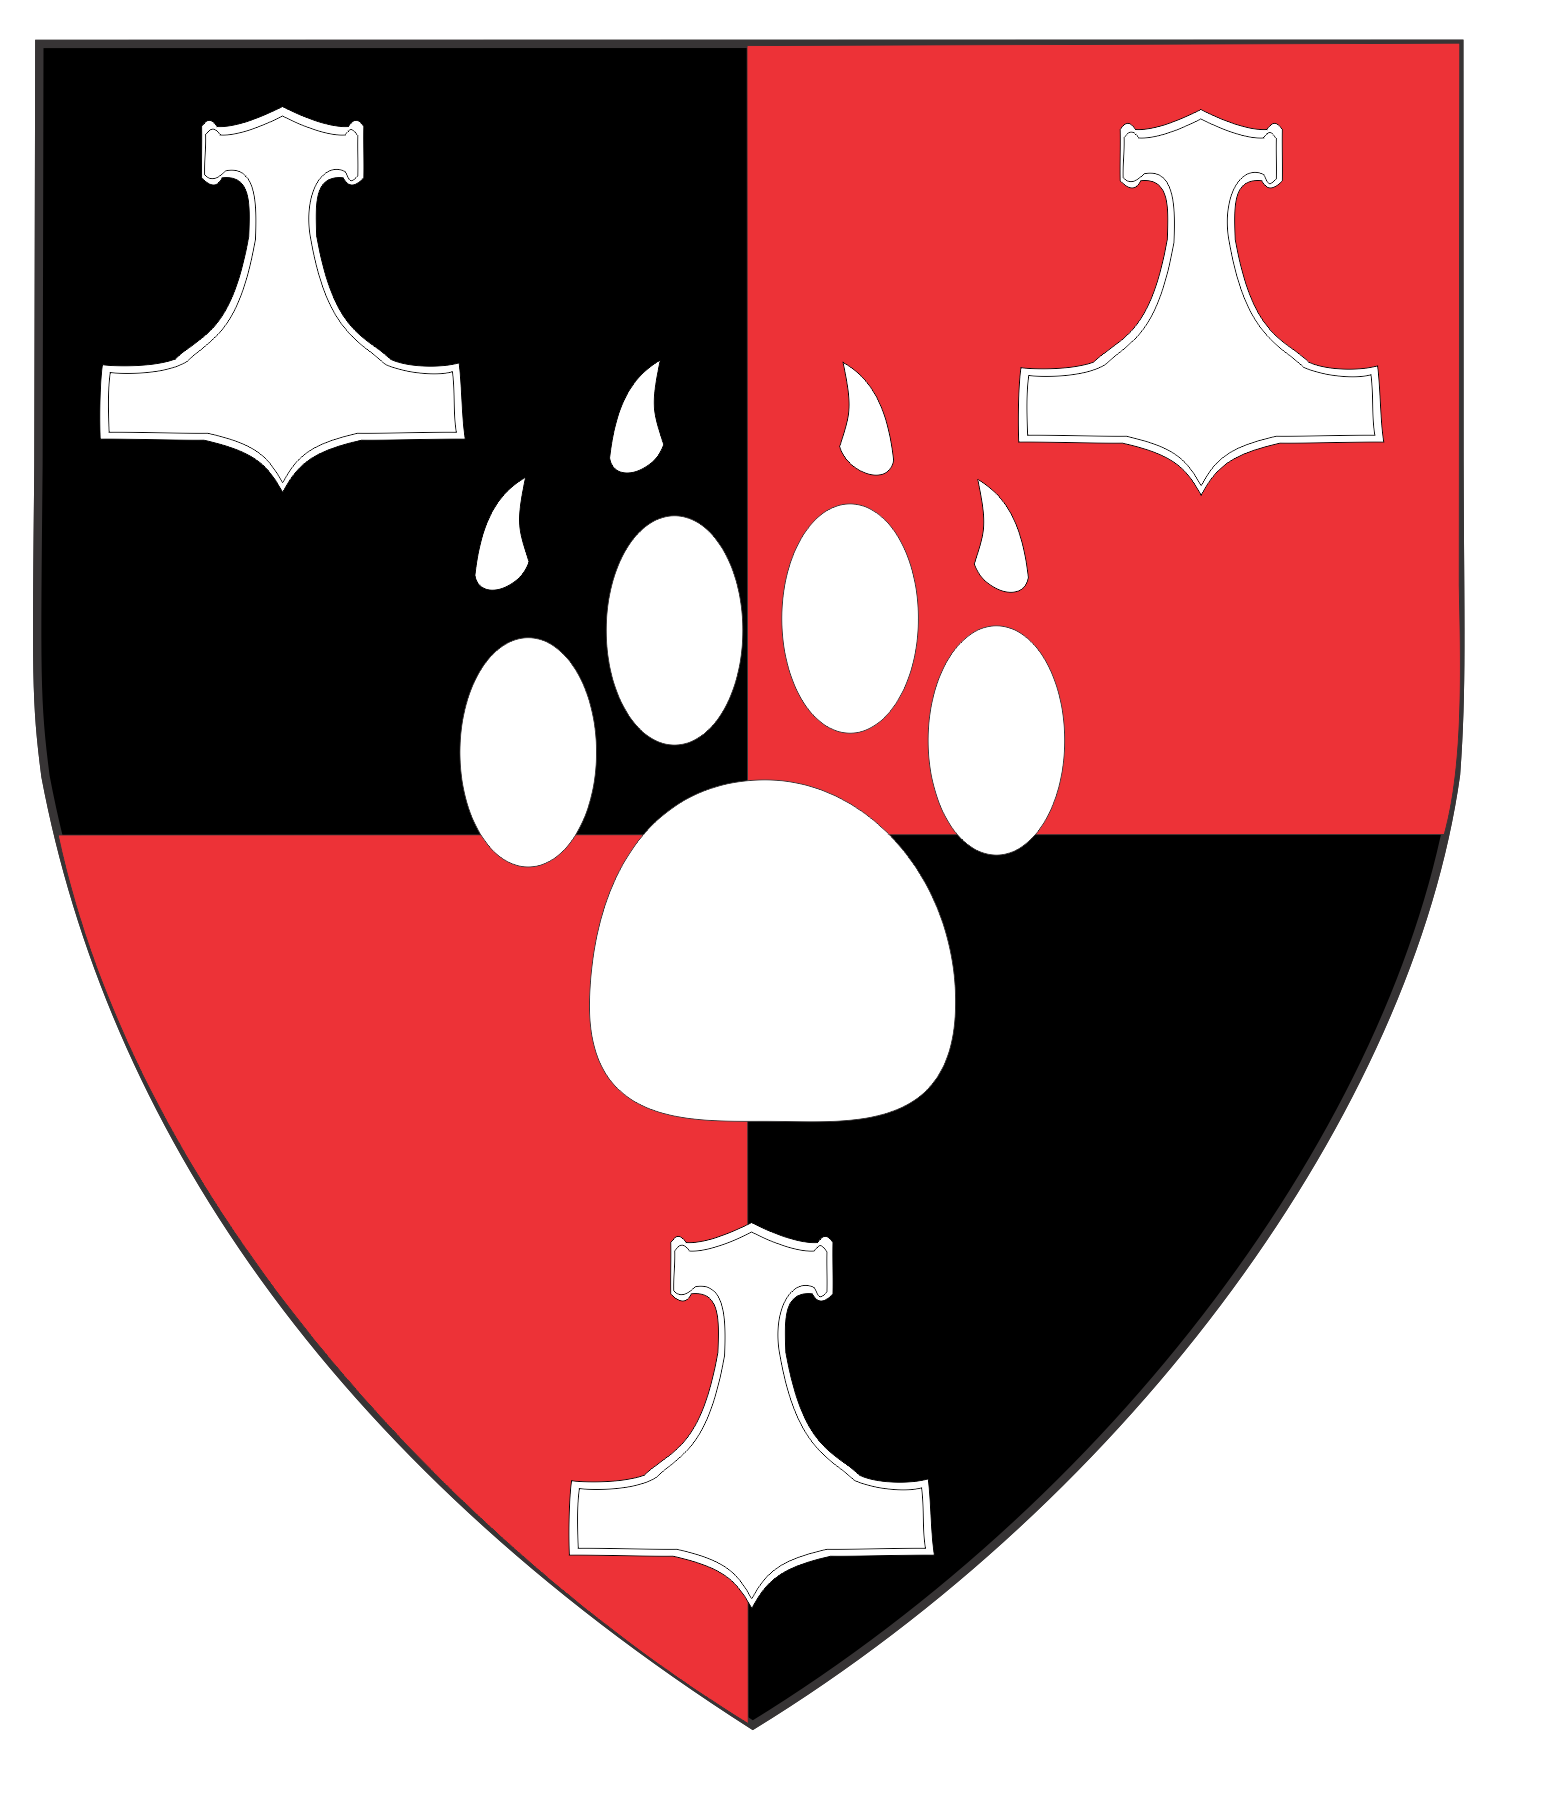 Quarterly sable and gules, a bear's paw print between three Thor's hammers argent.